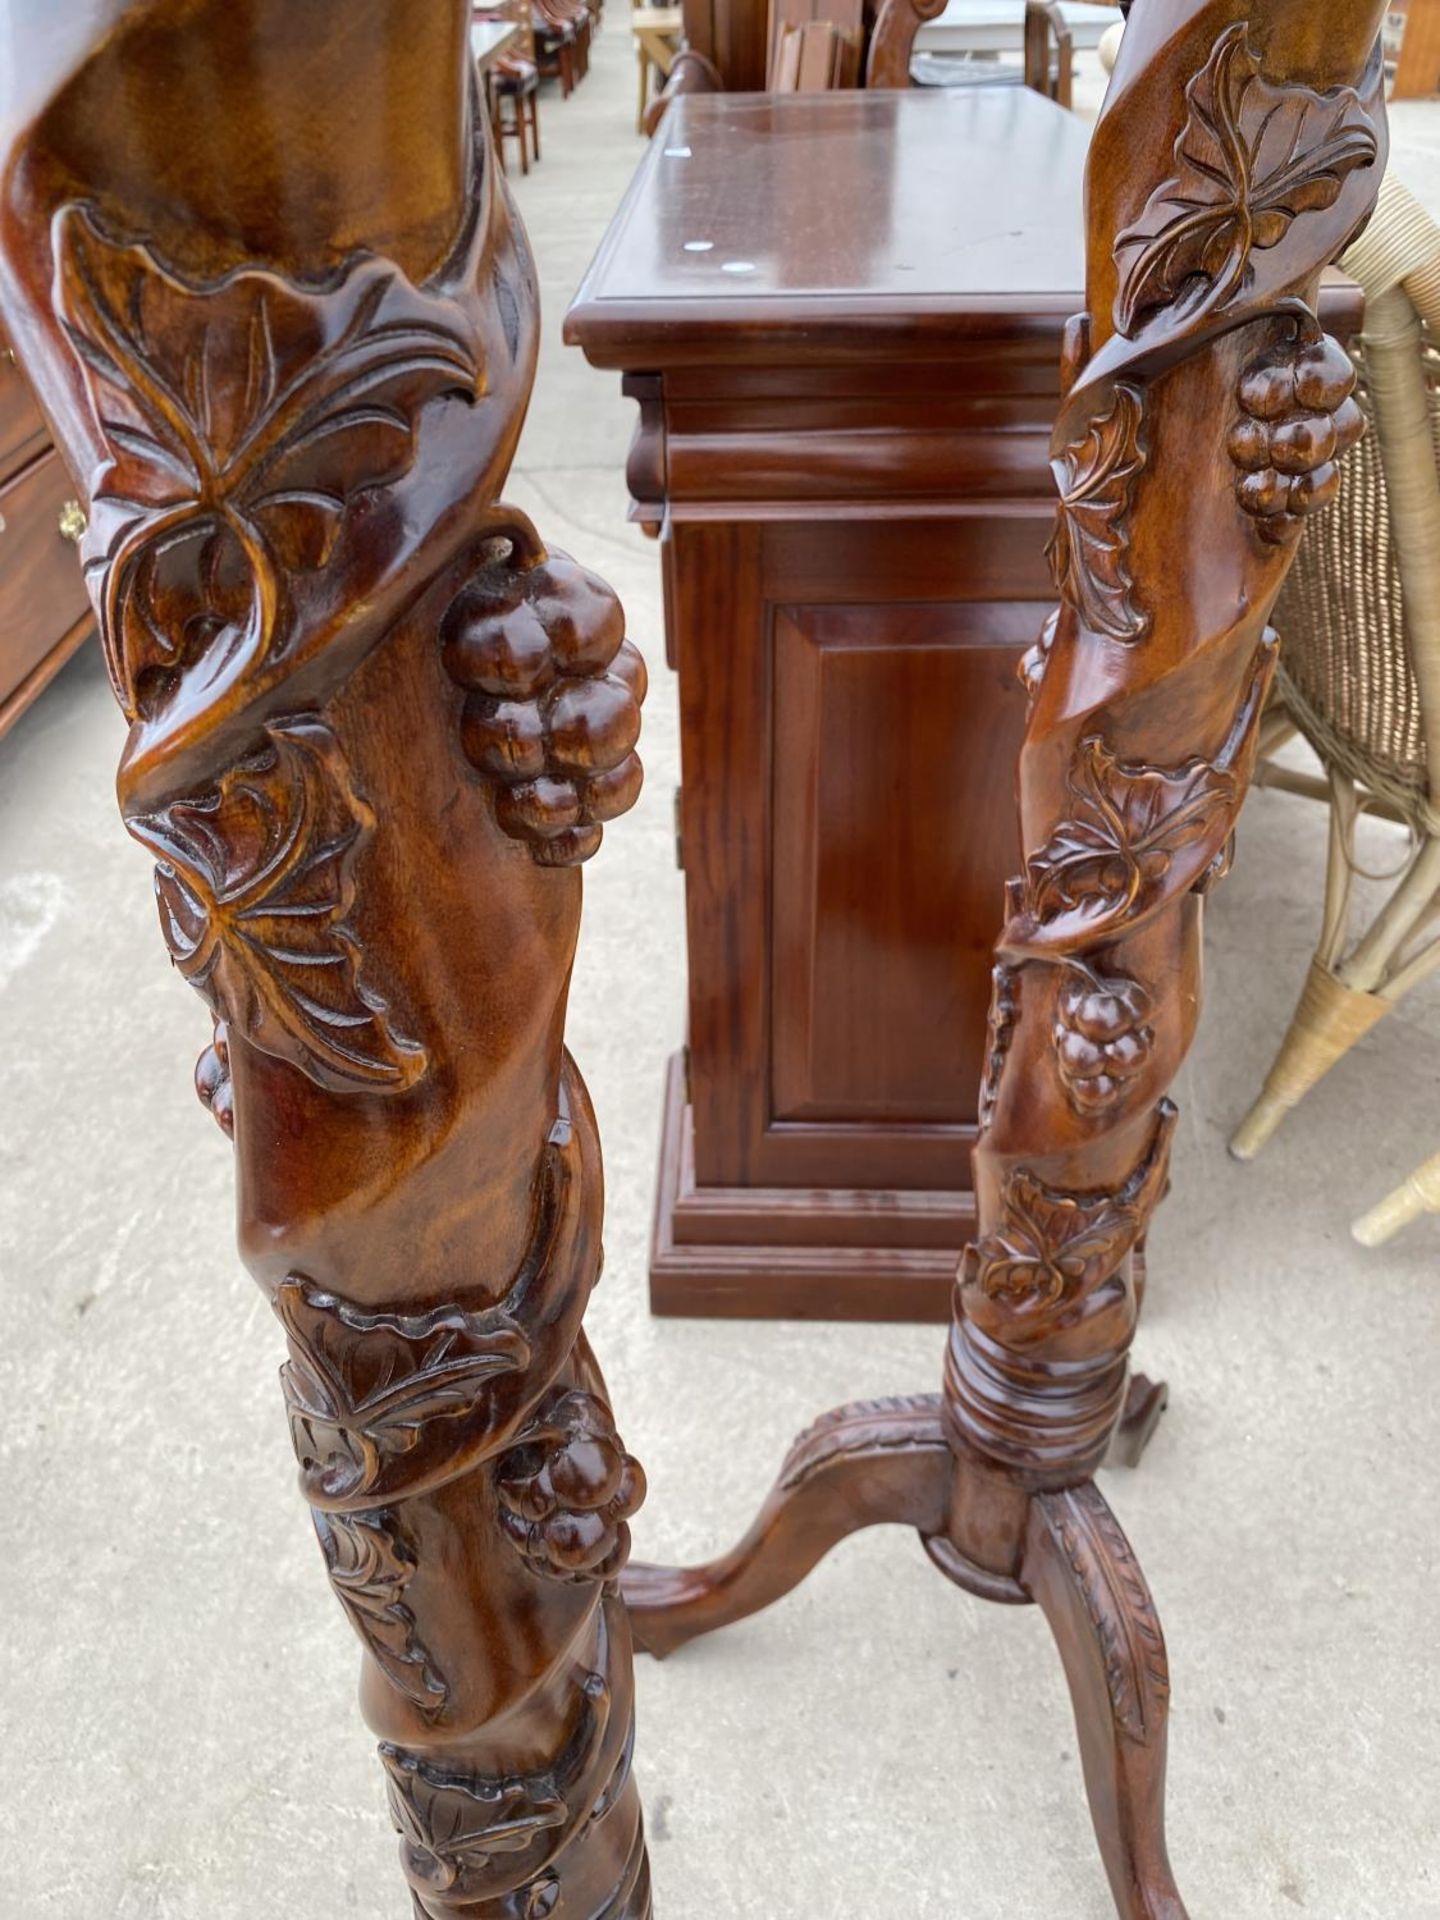 A PAIR OF VICTORIAN STYLE MAHOGANY TORCHERES ON TRIPOD BASES WITH FRUIT AND LEAF COLUMN DECORATION - Image 4 of 6